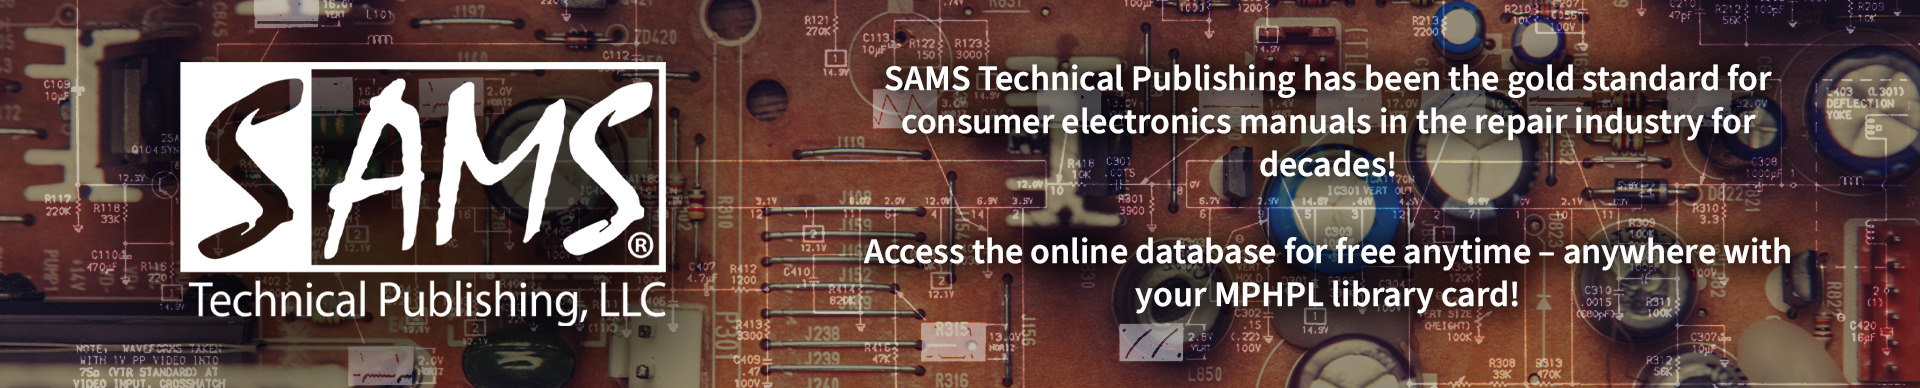 SAMS Technical Publishing has been the gold standard for consumer electronics manuals in the repair industry for decades!  